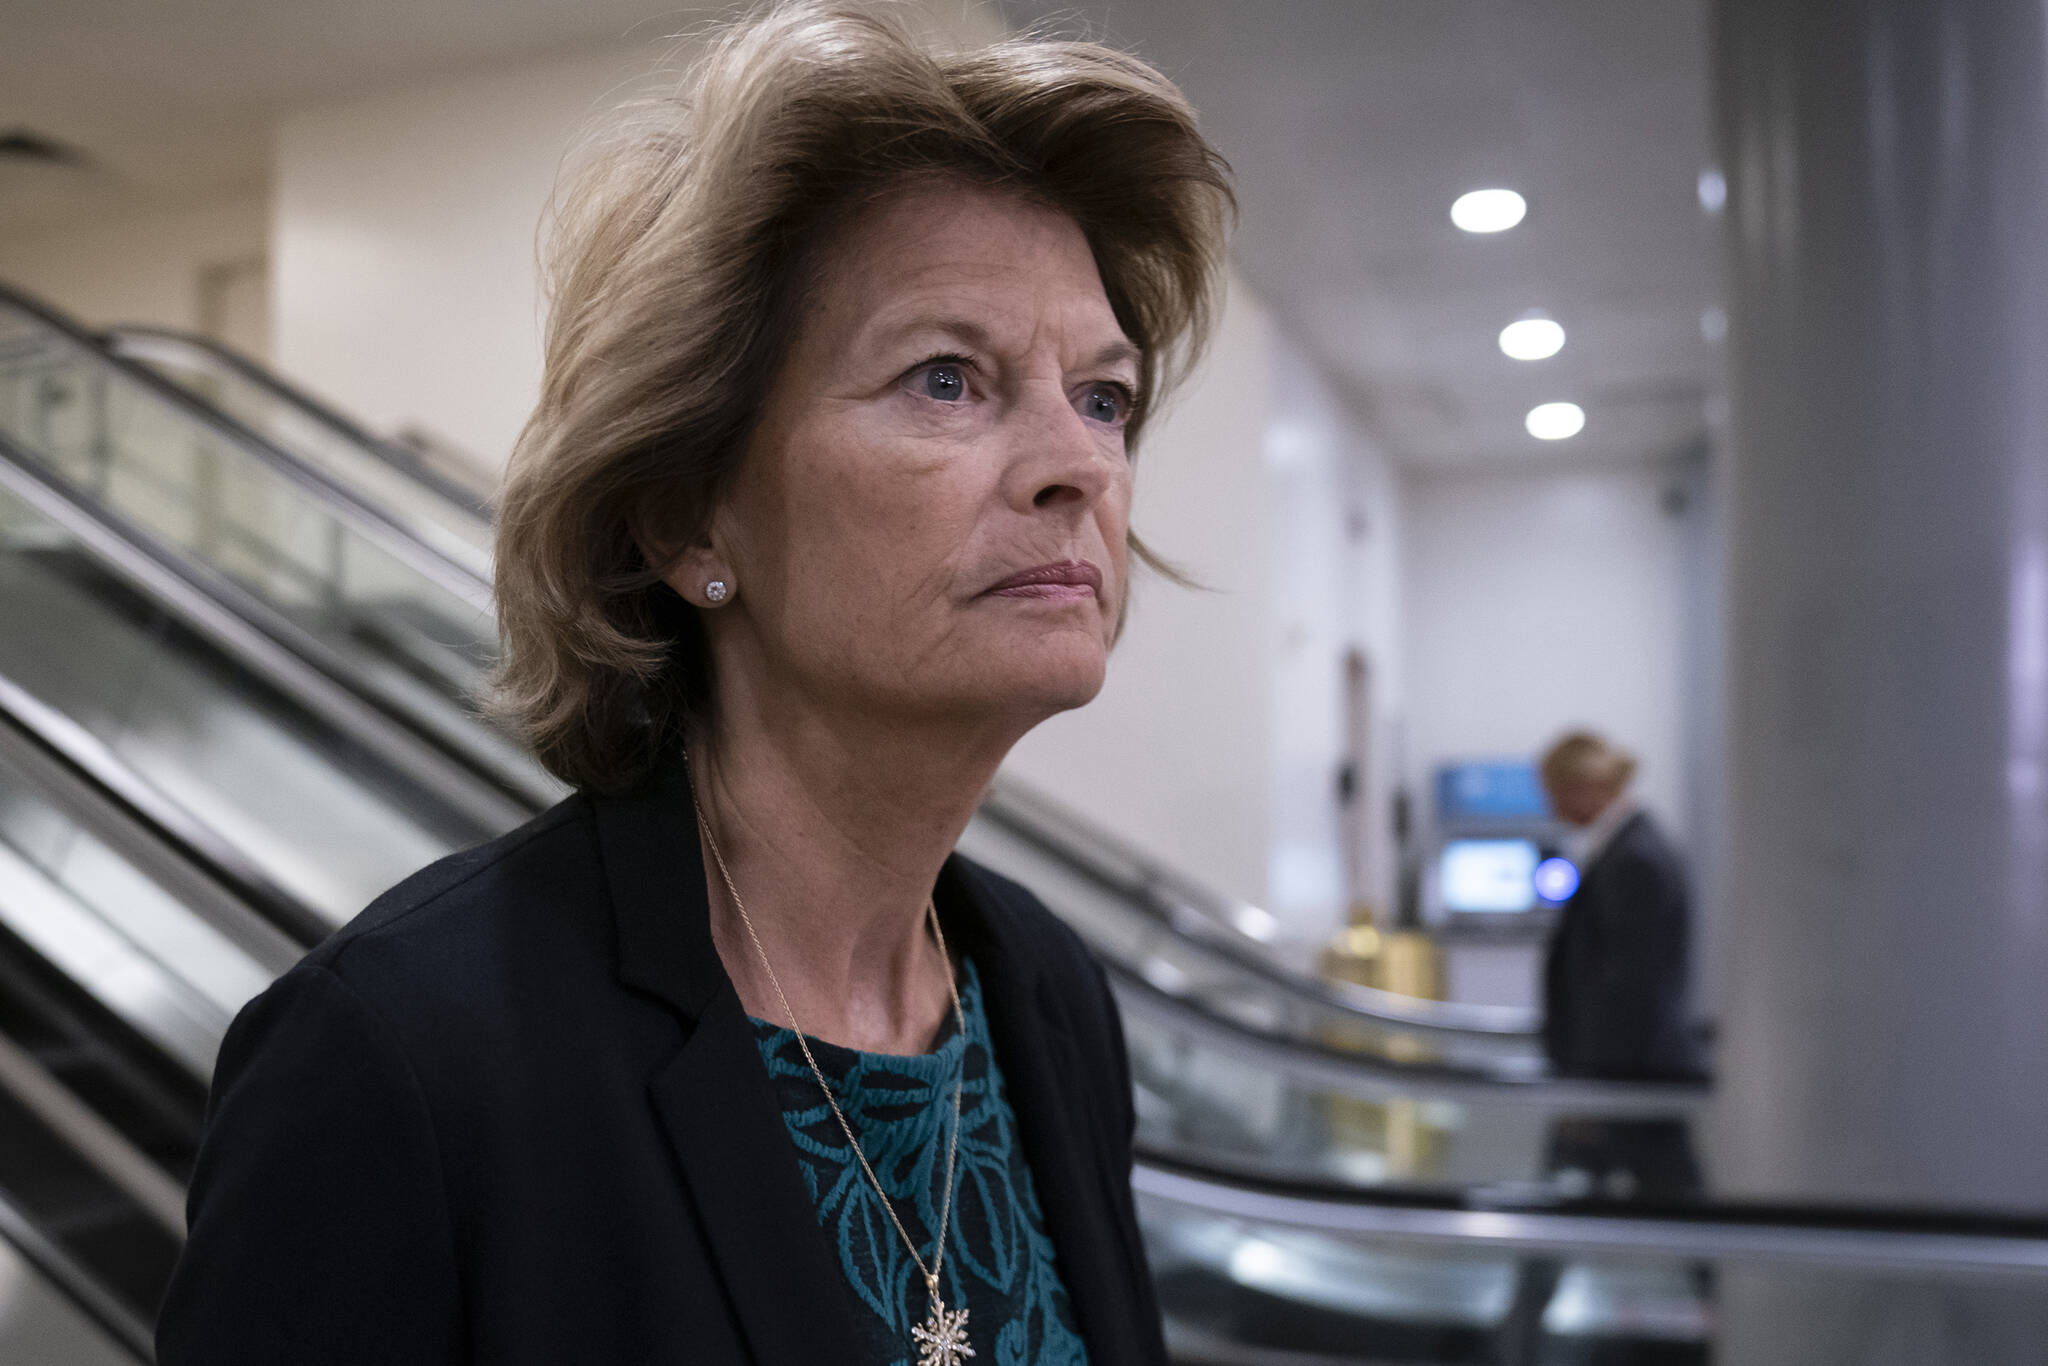 In this Jan. 8, 2020, file photo Sen. Lisa Murkowski, R-Alaska, heads to a briefing on Capitol Hill in Washington. An Alaska man faces federal charges after authorities allege he threatened to hire an assassin to kill Murkowski, according to court documents unsealed Wednesday. (AP Photo/J. Scott Applewhite,File)